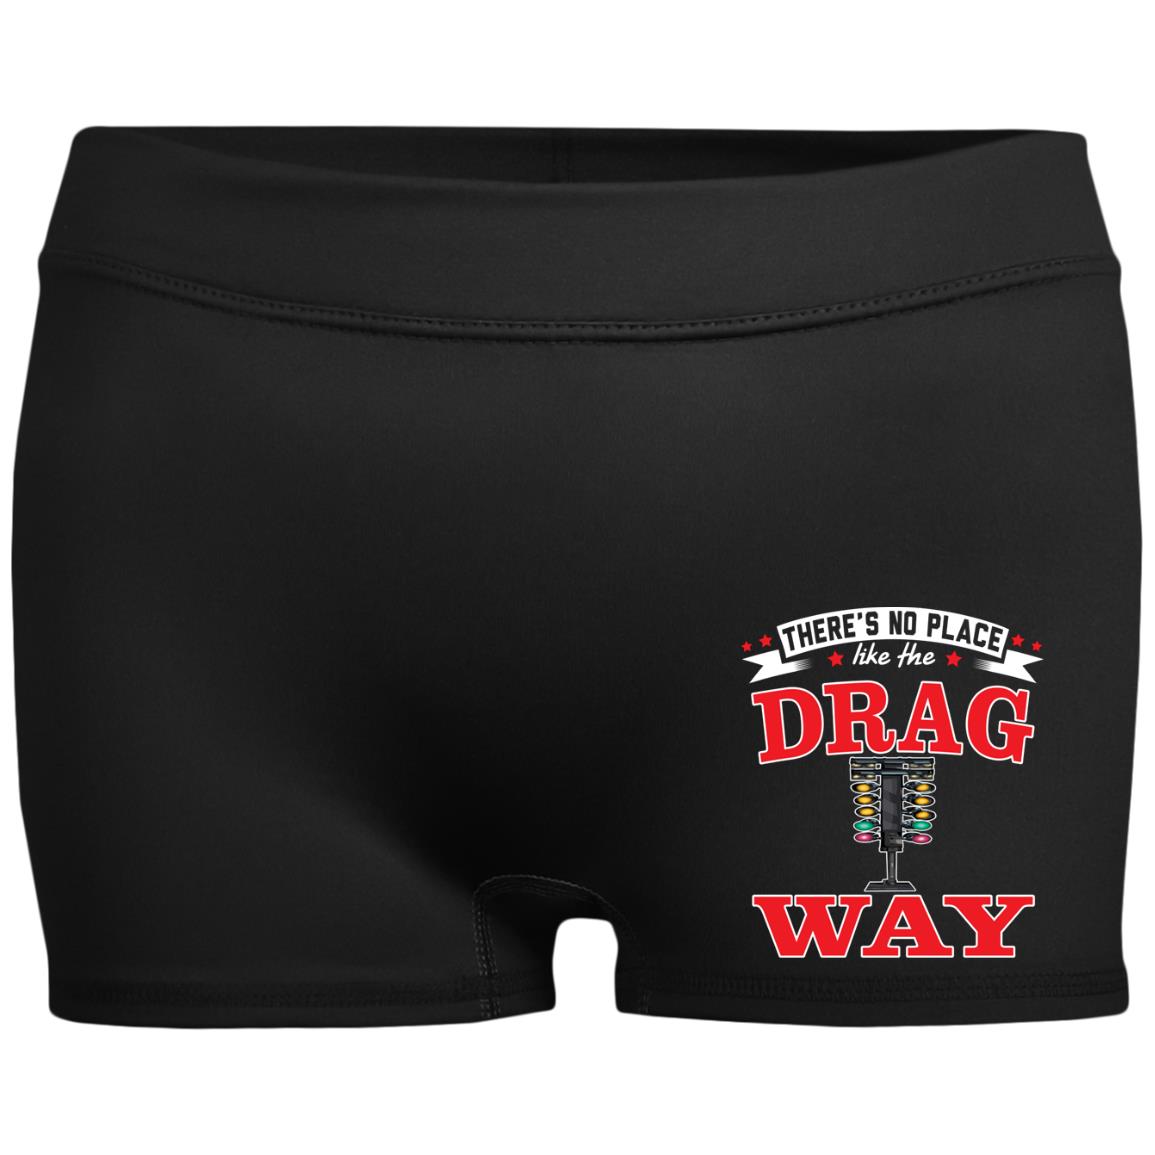 There's No Place Like The Dragway Ladies' Fitted Moisture-Wicking 2.5 inch Inseam Shorts